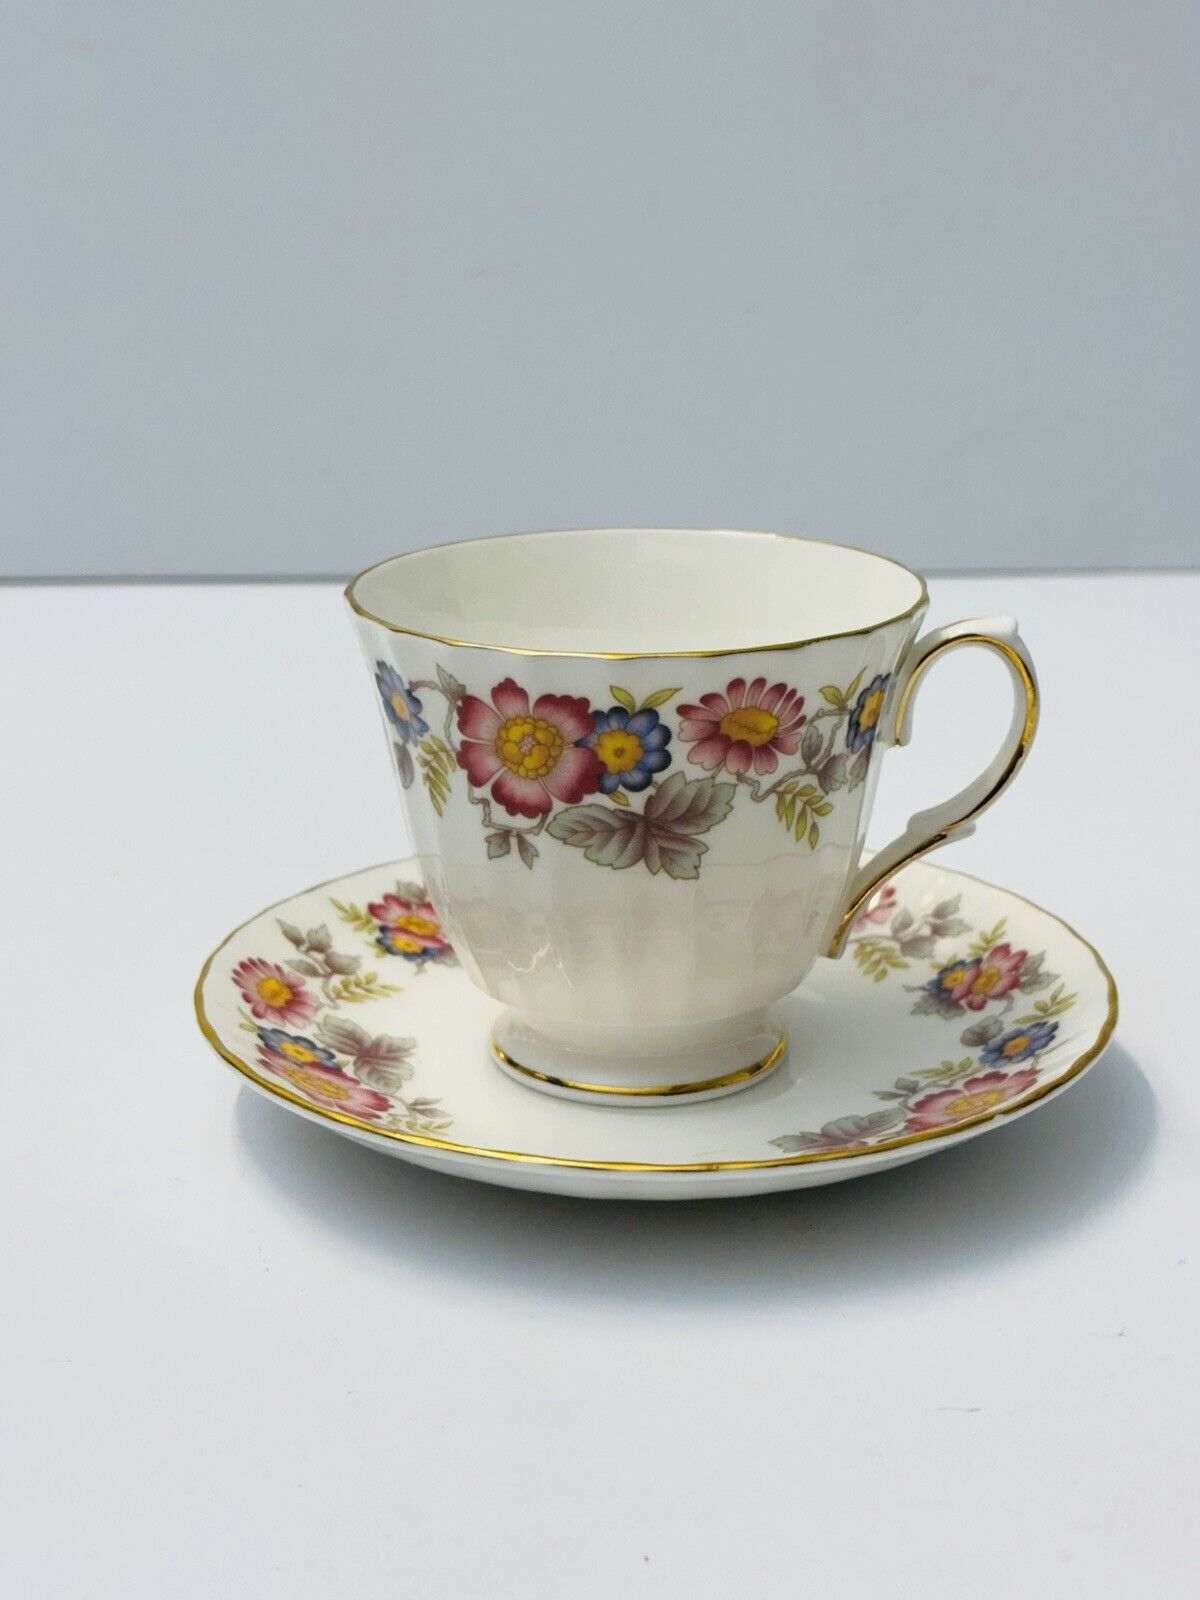 VINTAGE DUCHESS Tea Cup & Saucer floral Design FINE Bone China Made in England